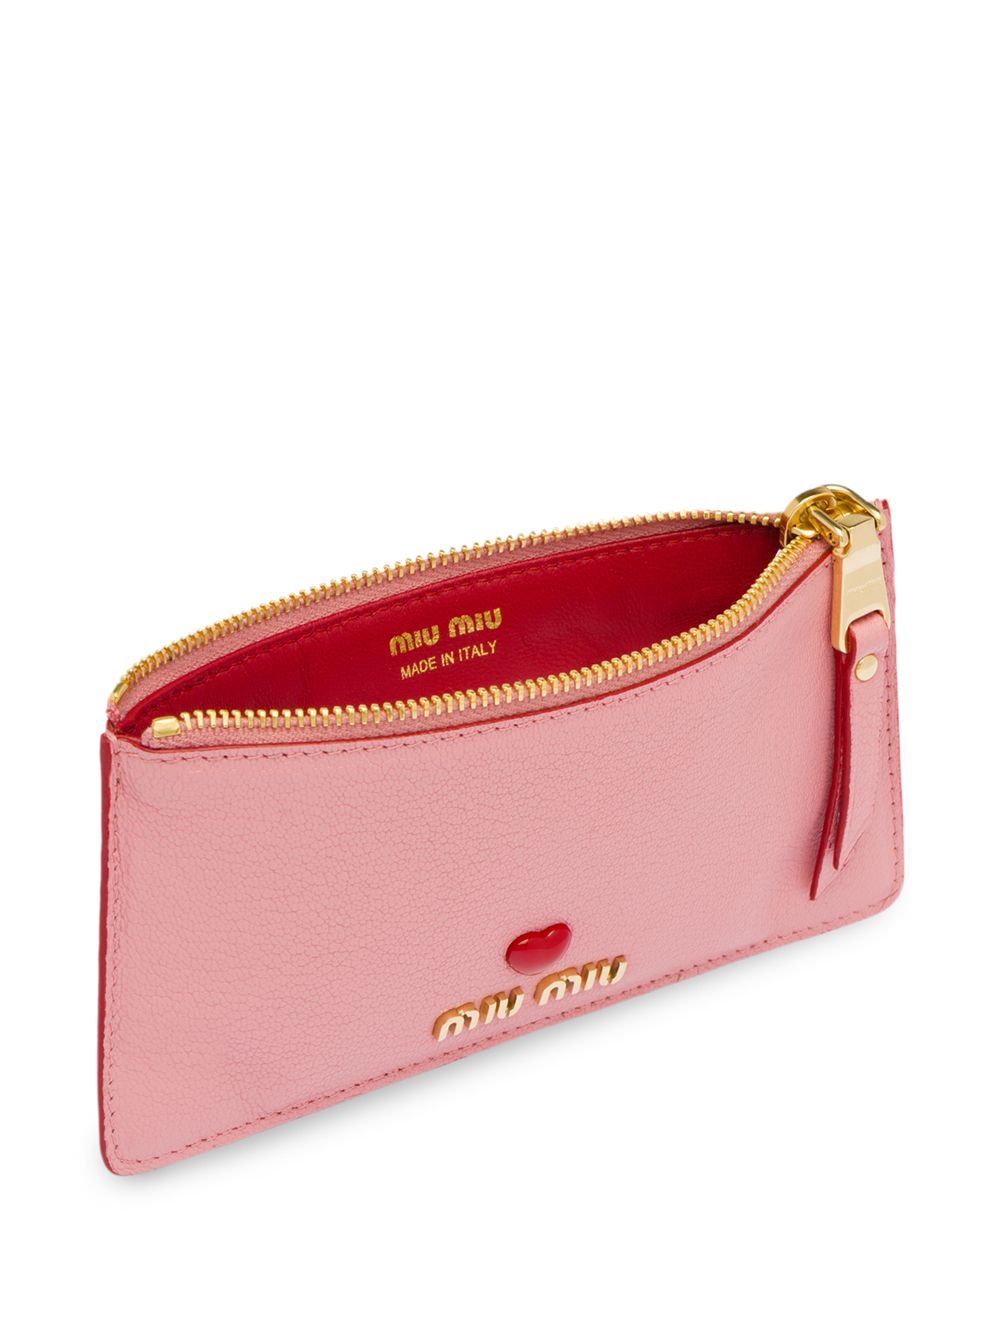 Shop Miu Miu heart pendant pouch with Express Delivery - FARFETCH